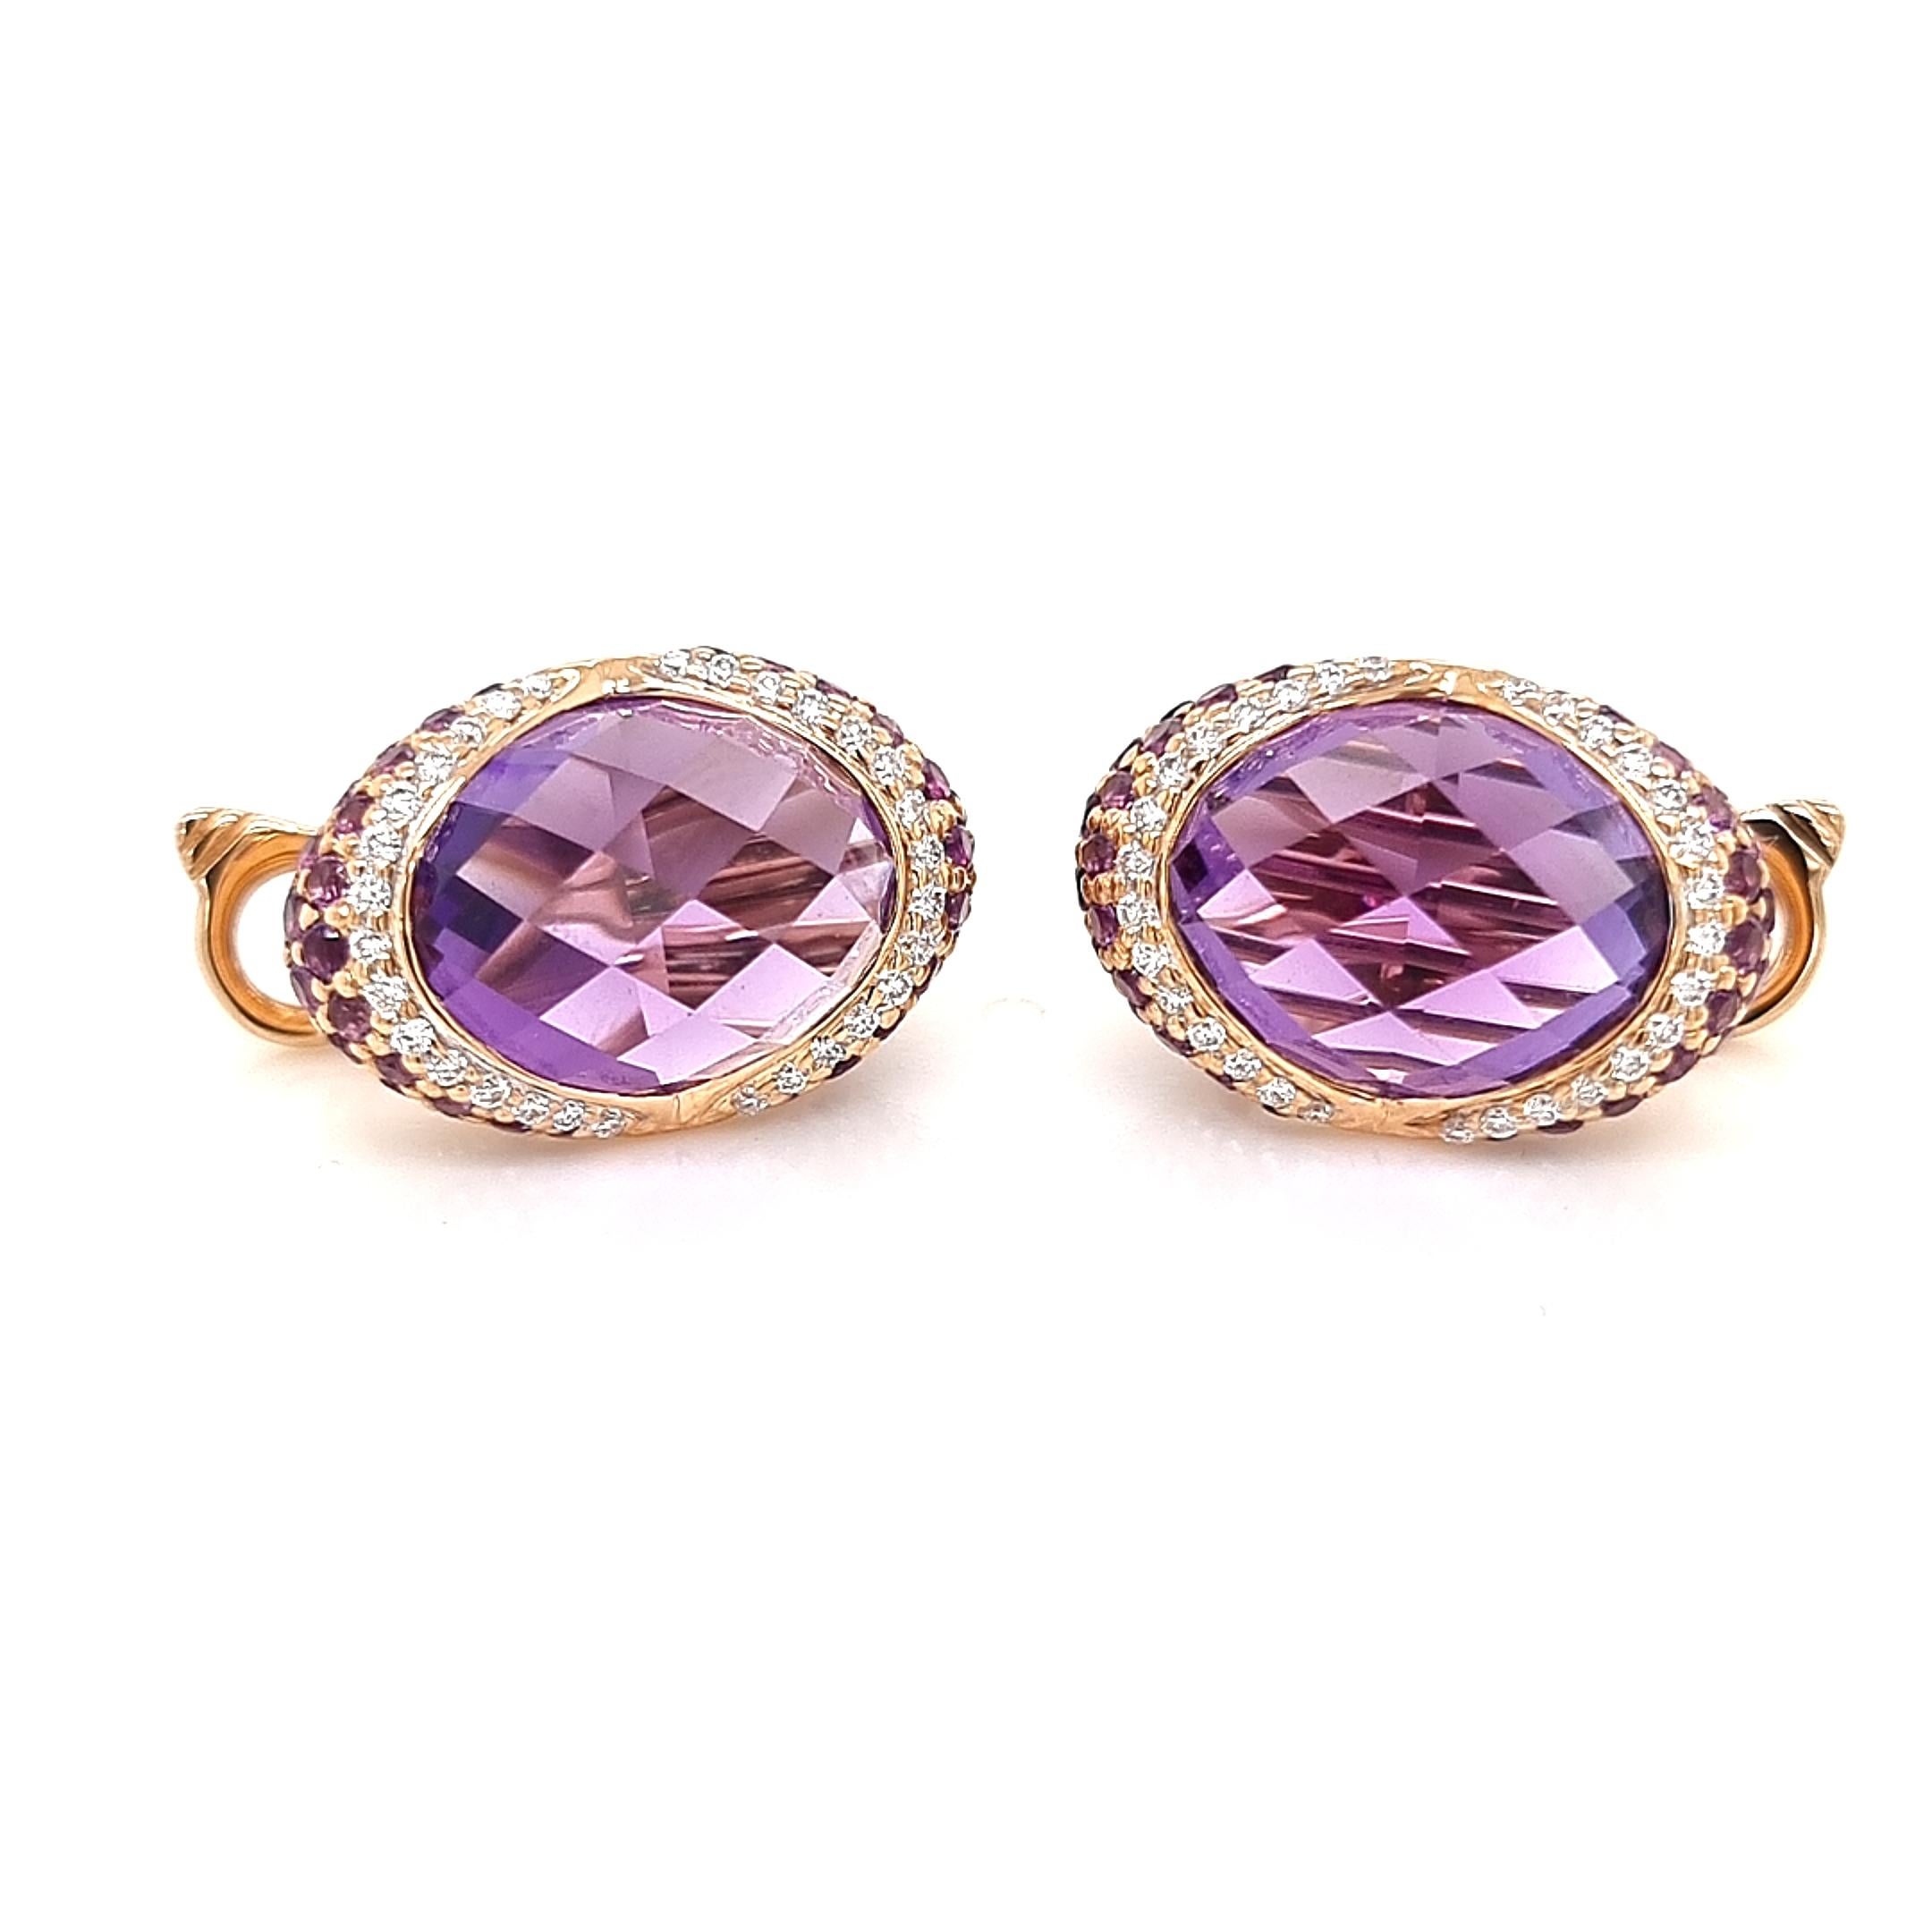 Round Cut 18K Yellow Gold Earrings with White Diamonds and Amethysts